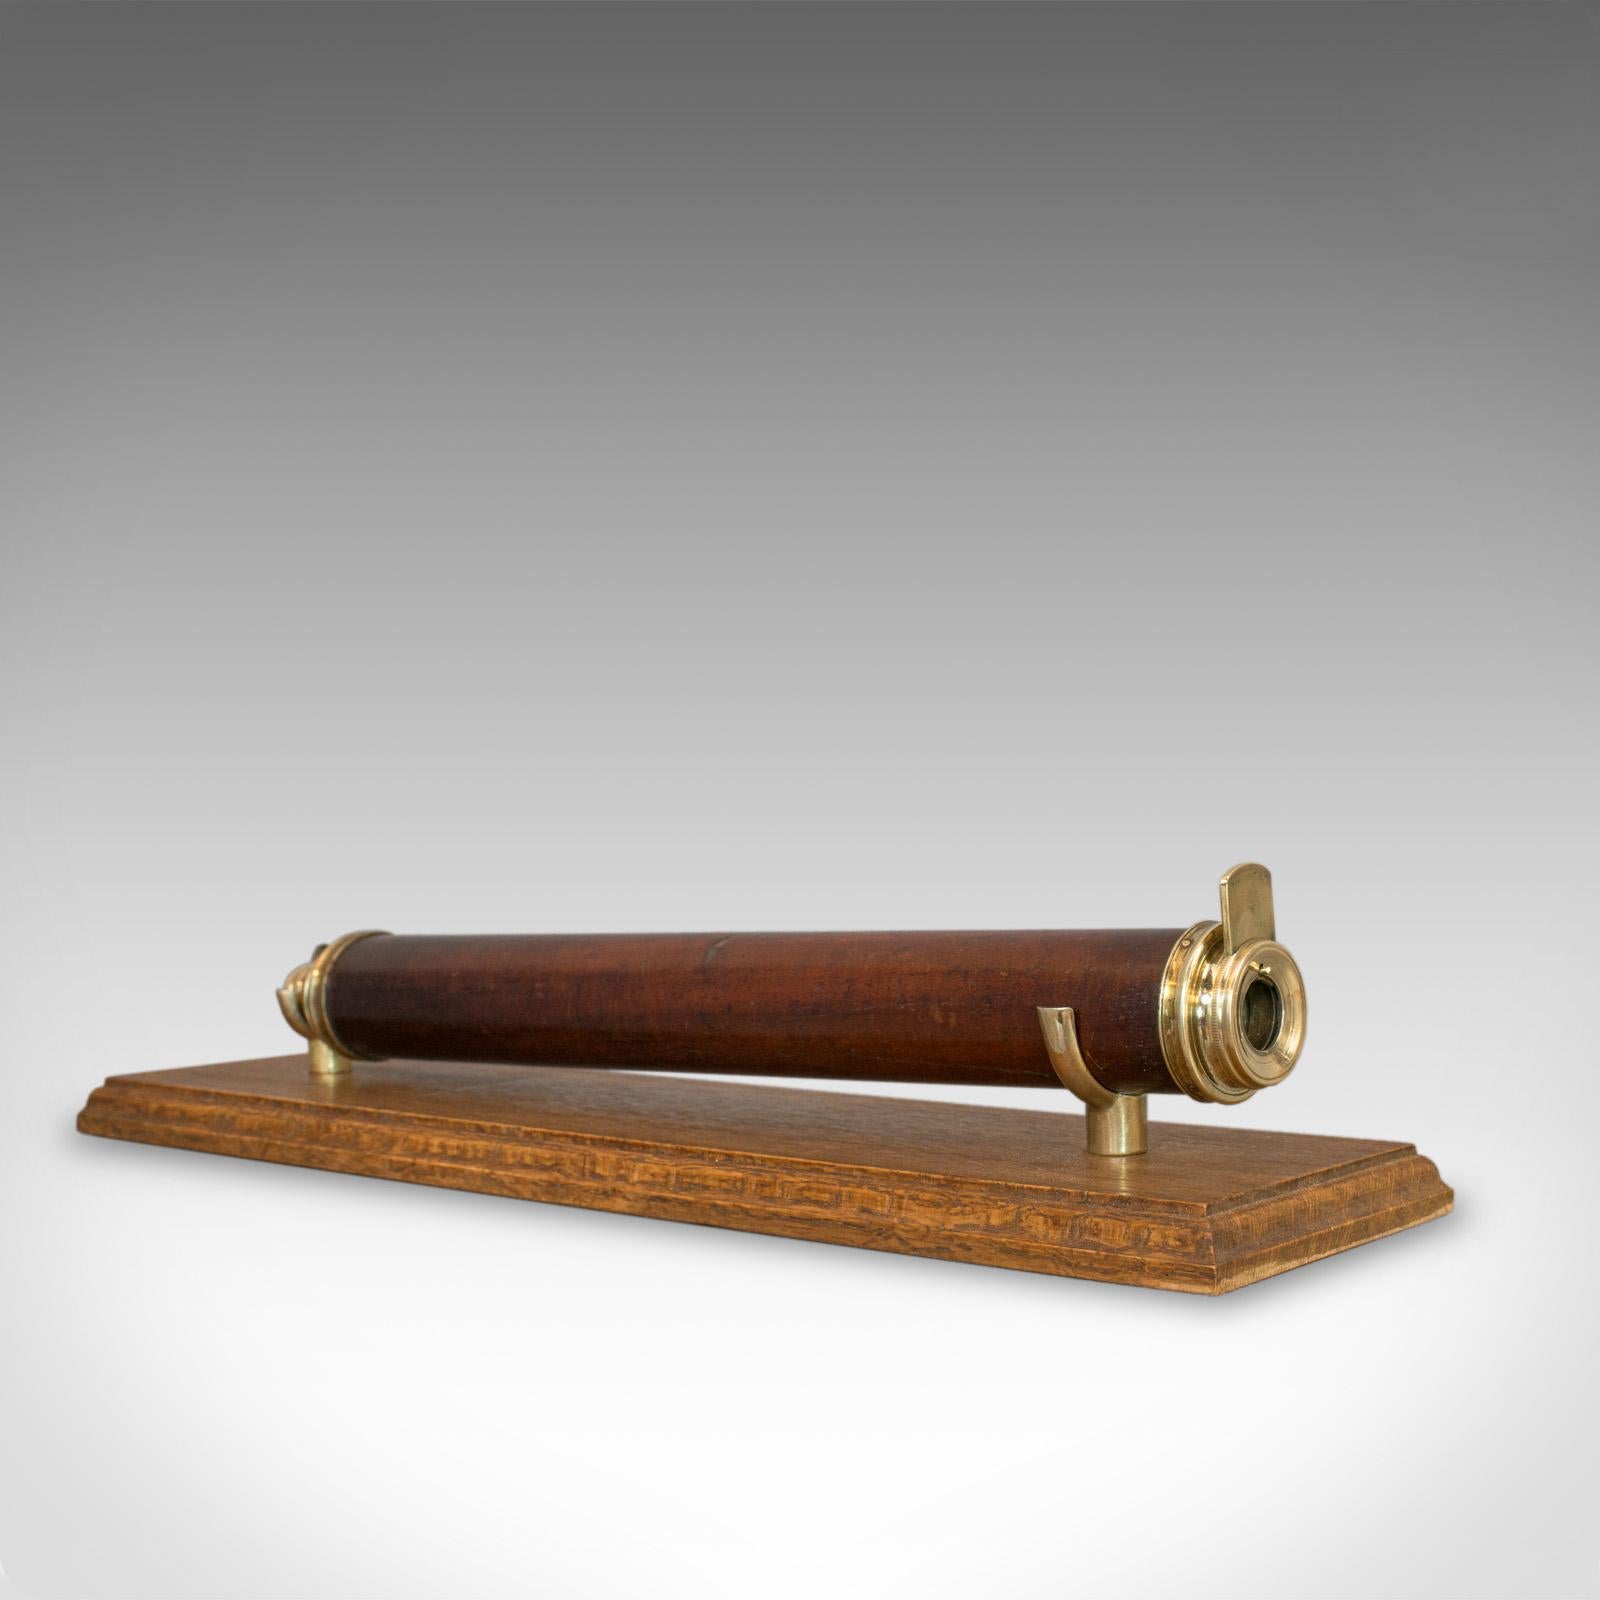 This is an antique telescope, a single draw refractor for terrestrial or astronomical use. An English, Georgian piece dating to circa 1760.

Perfect for bird watching, landscape appreciation, wildlife stalking, or maritime observation. Equally